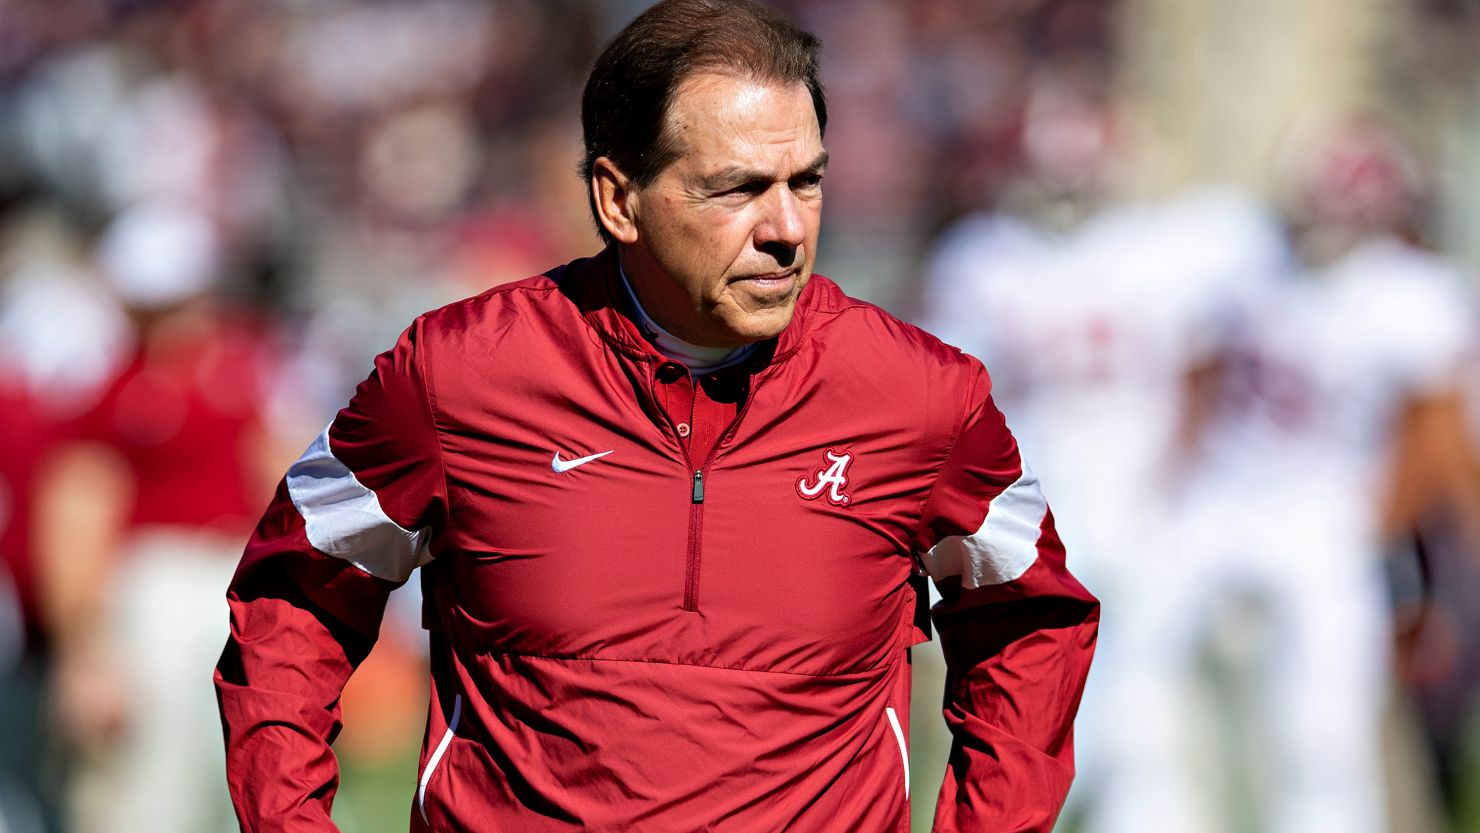 Alabama head coach Nick Saban will be on the sidelines for Saturday night's pivotal game.